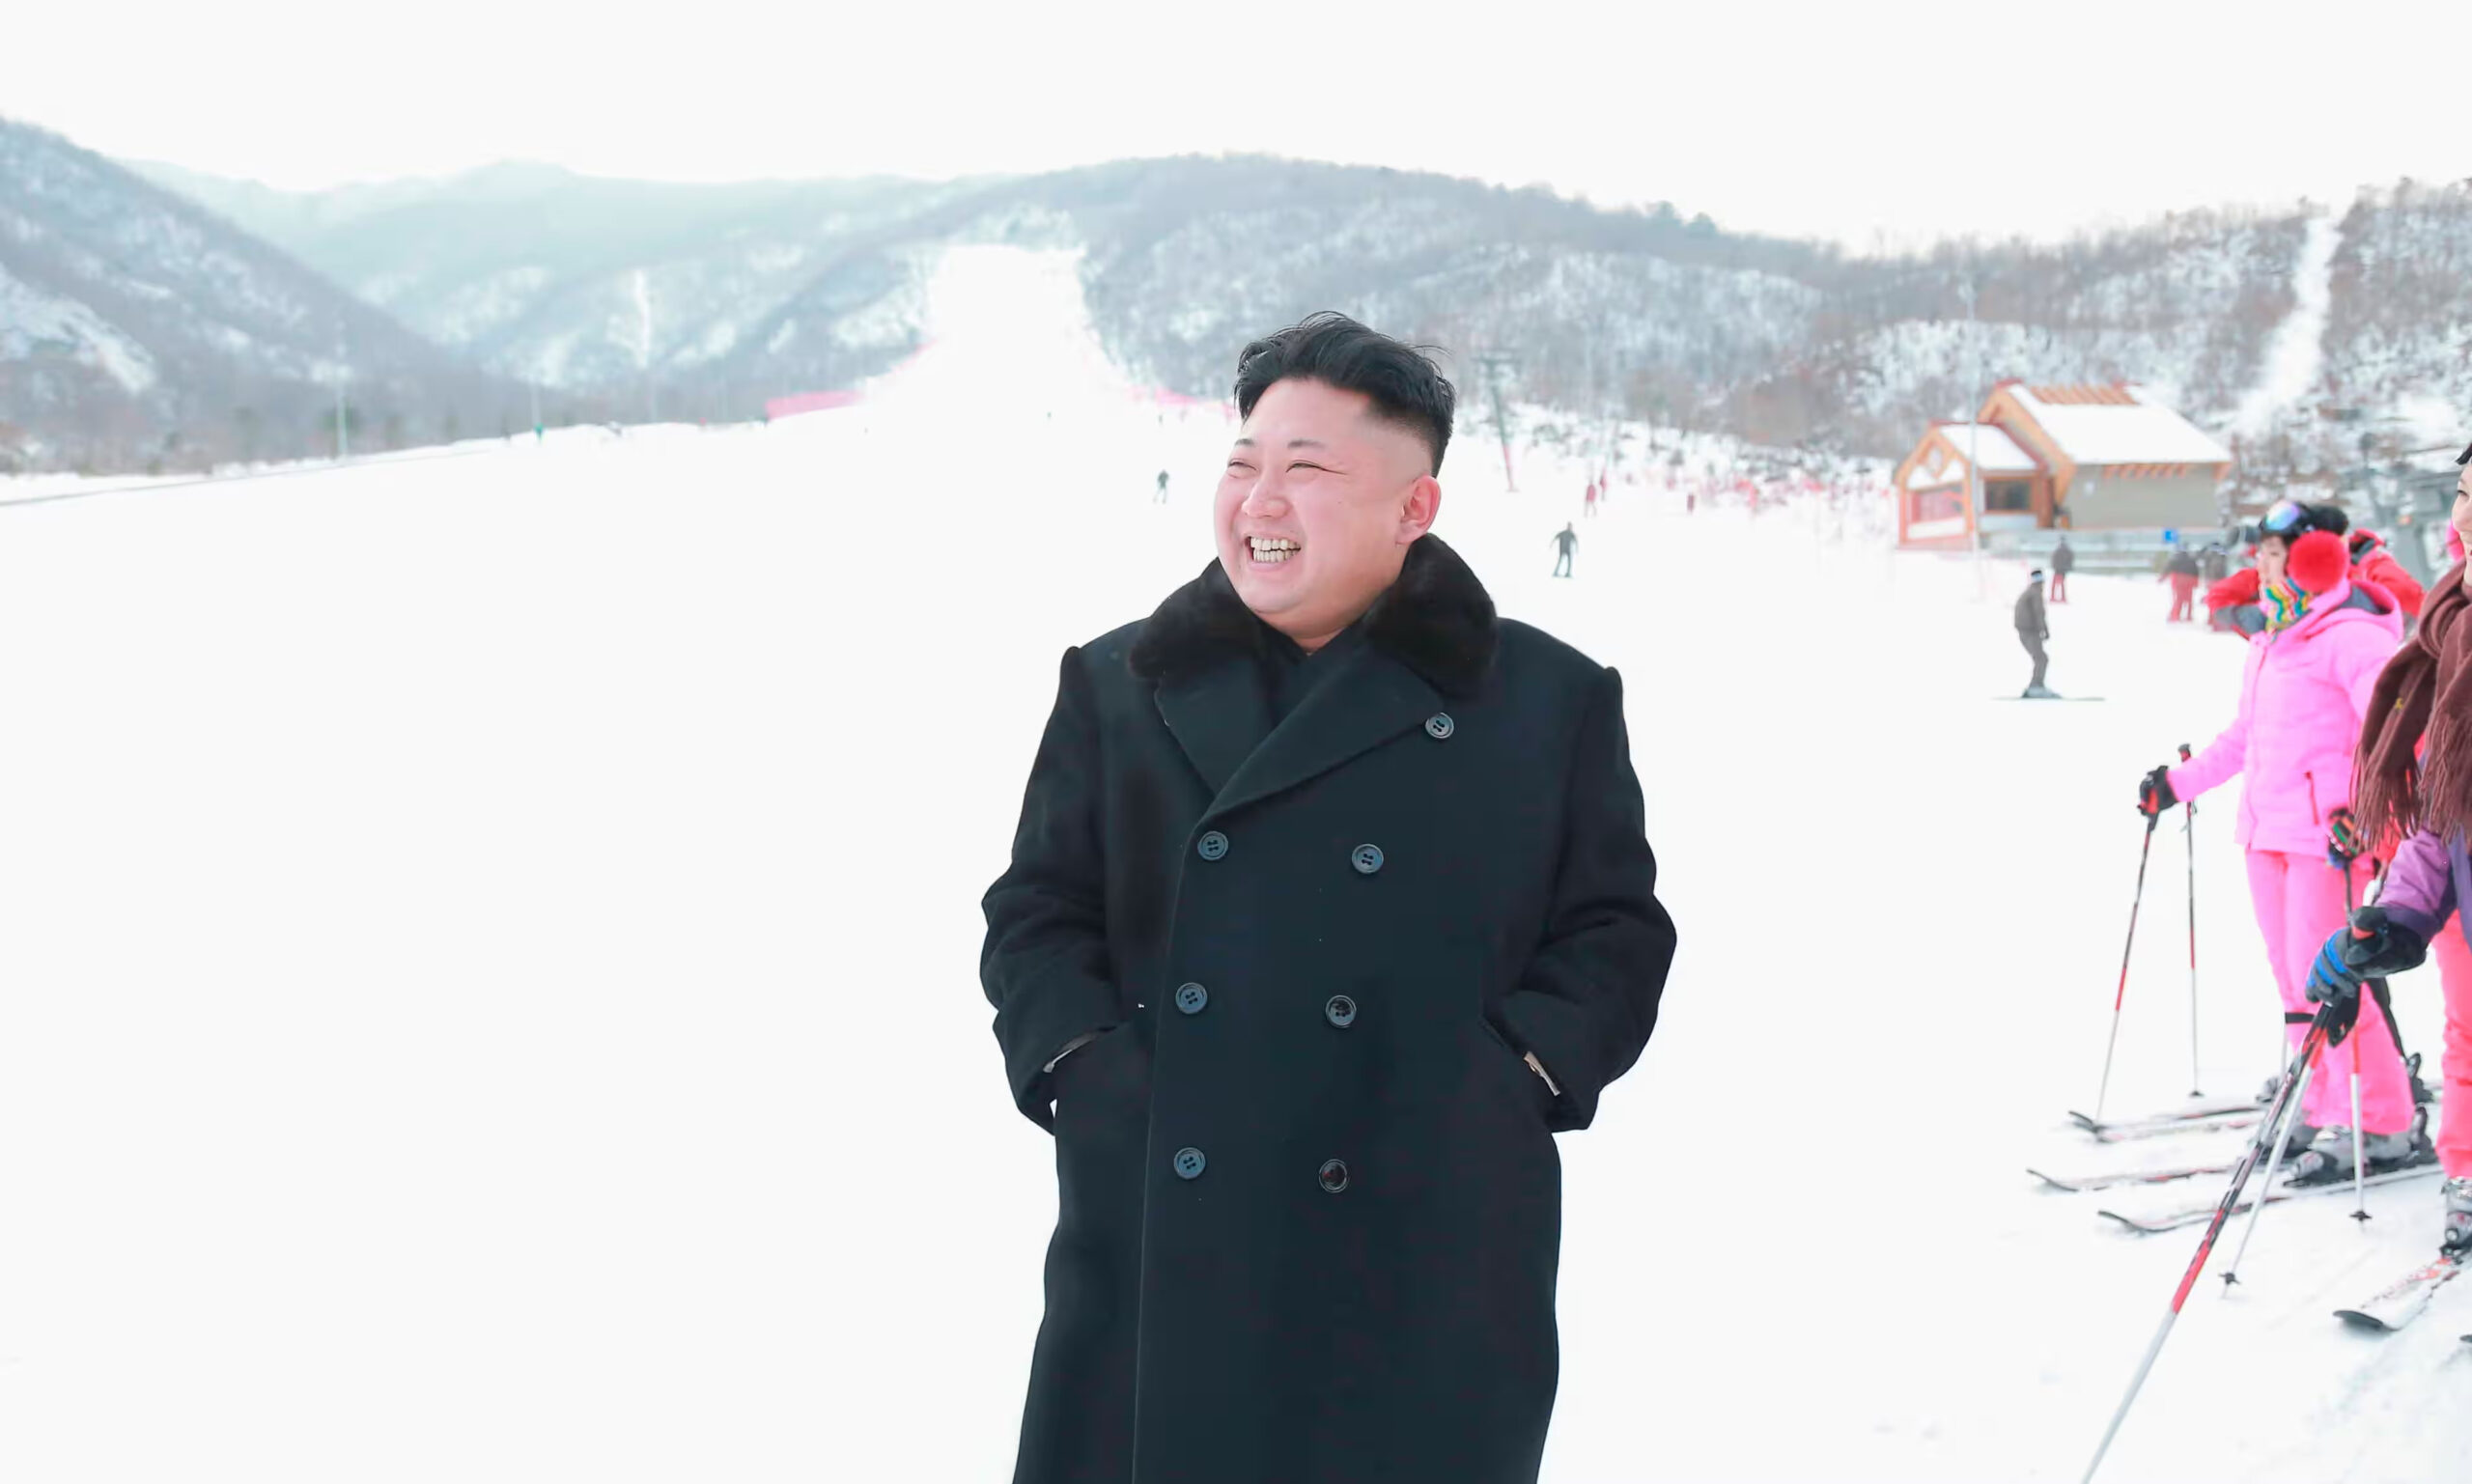 Kim visited the ‘five-star’ ski resort in the Masik Pass region, which features a hotel, ski service and rental shops, when it opened in 2013. This undated photo was released by North Korea's Korean Central News Agency. Photograph: KCNA/Reuters